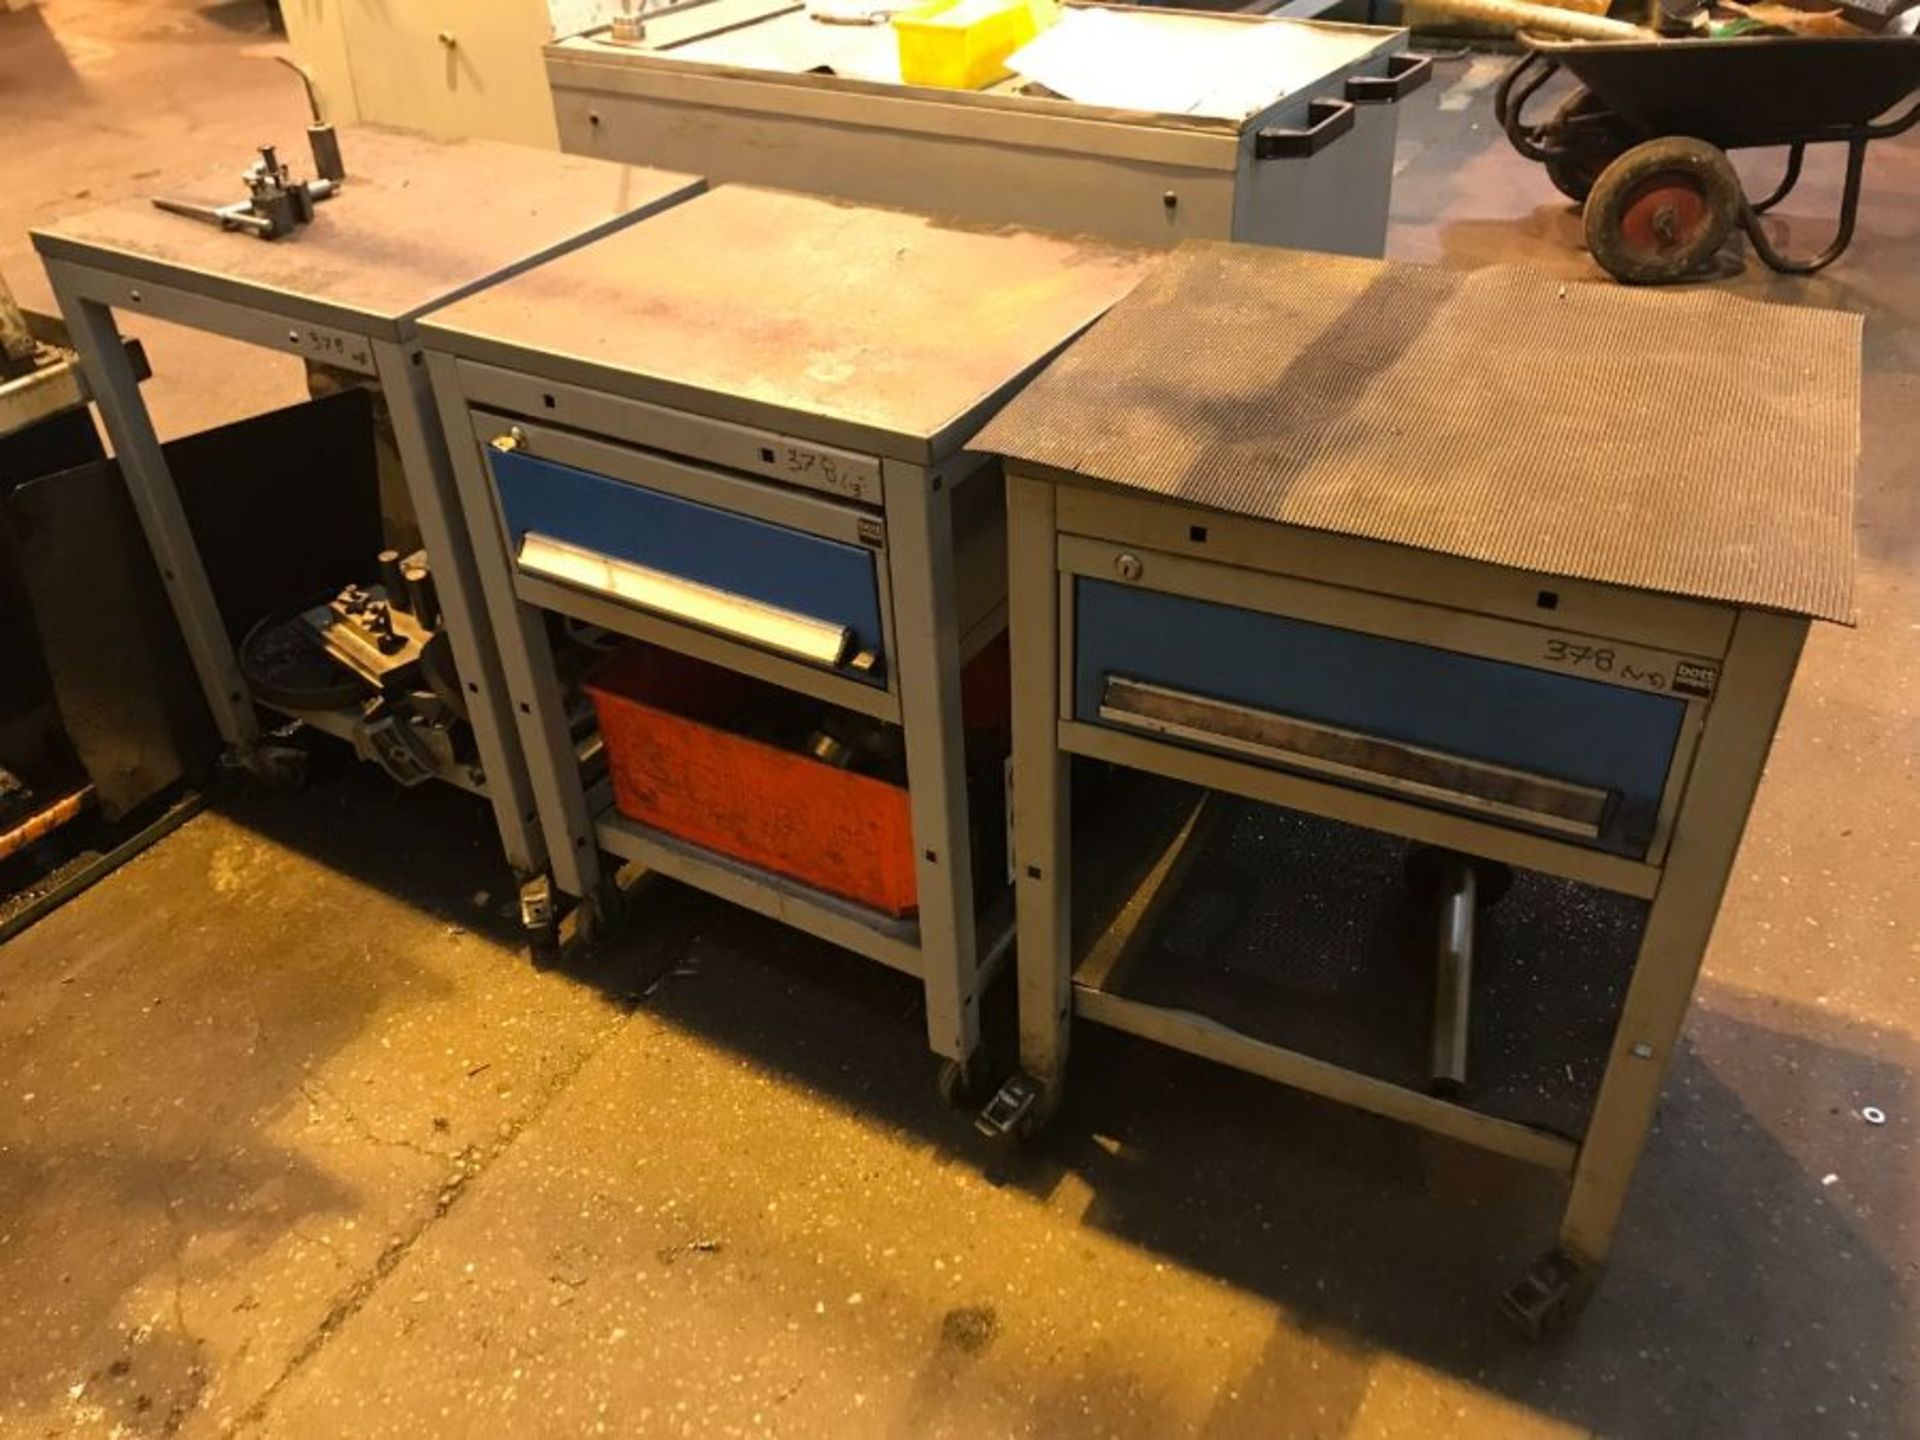 3 - Bott Compact mobile benches and contents